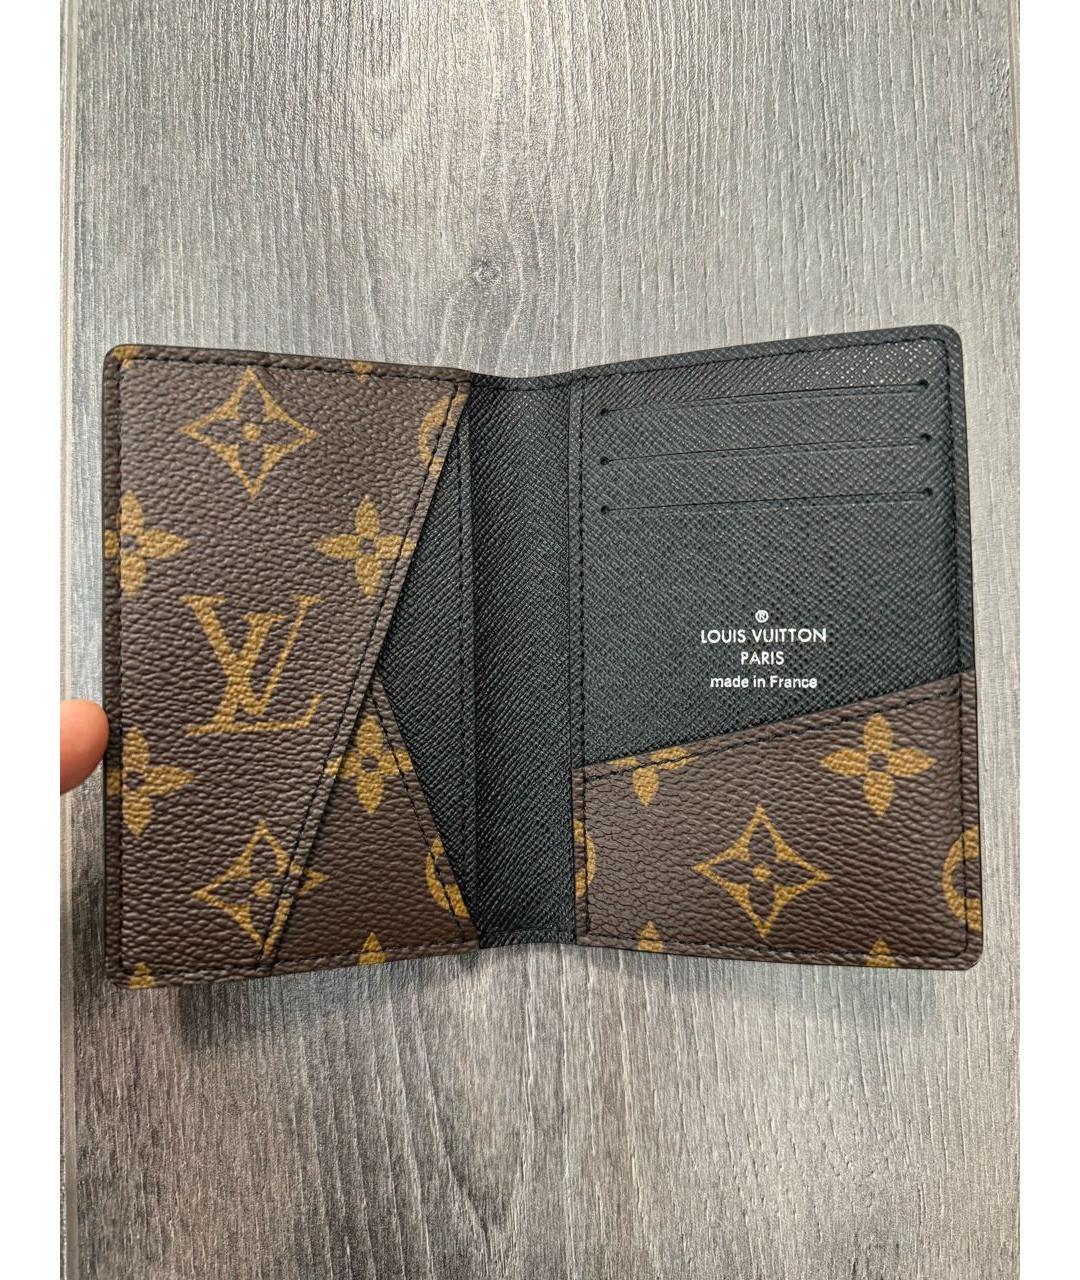 LOUIS VUITTON PRE-OWNED Коричневый кардхолдер, фото 7